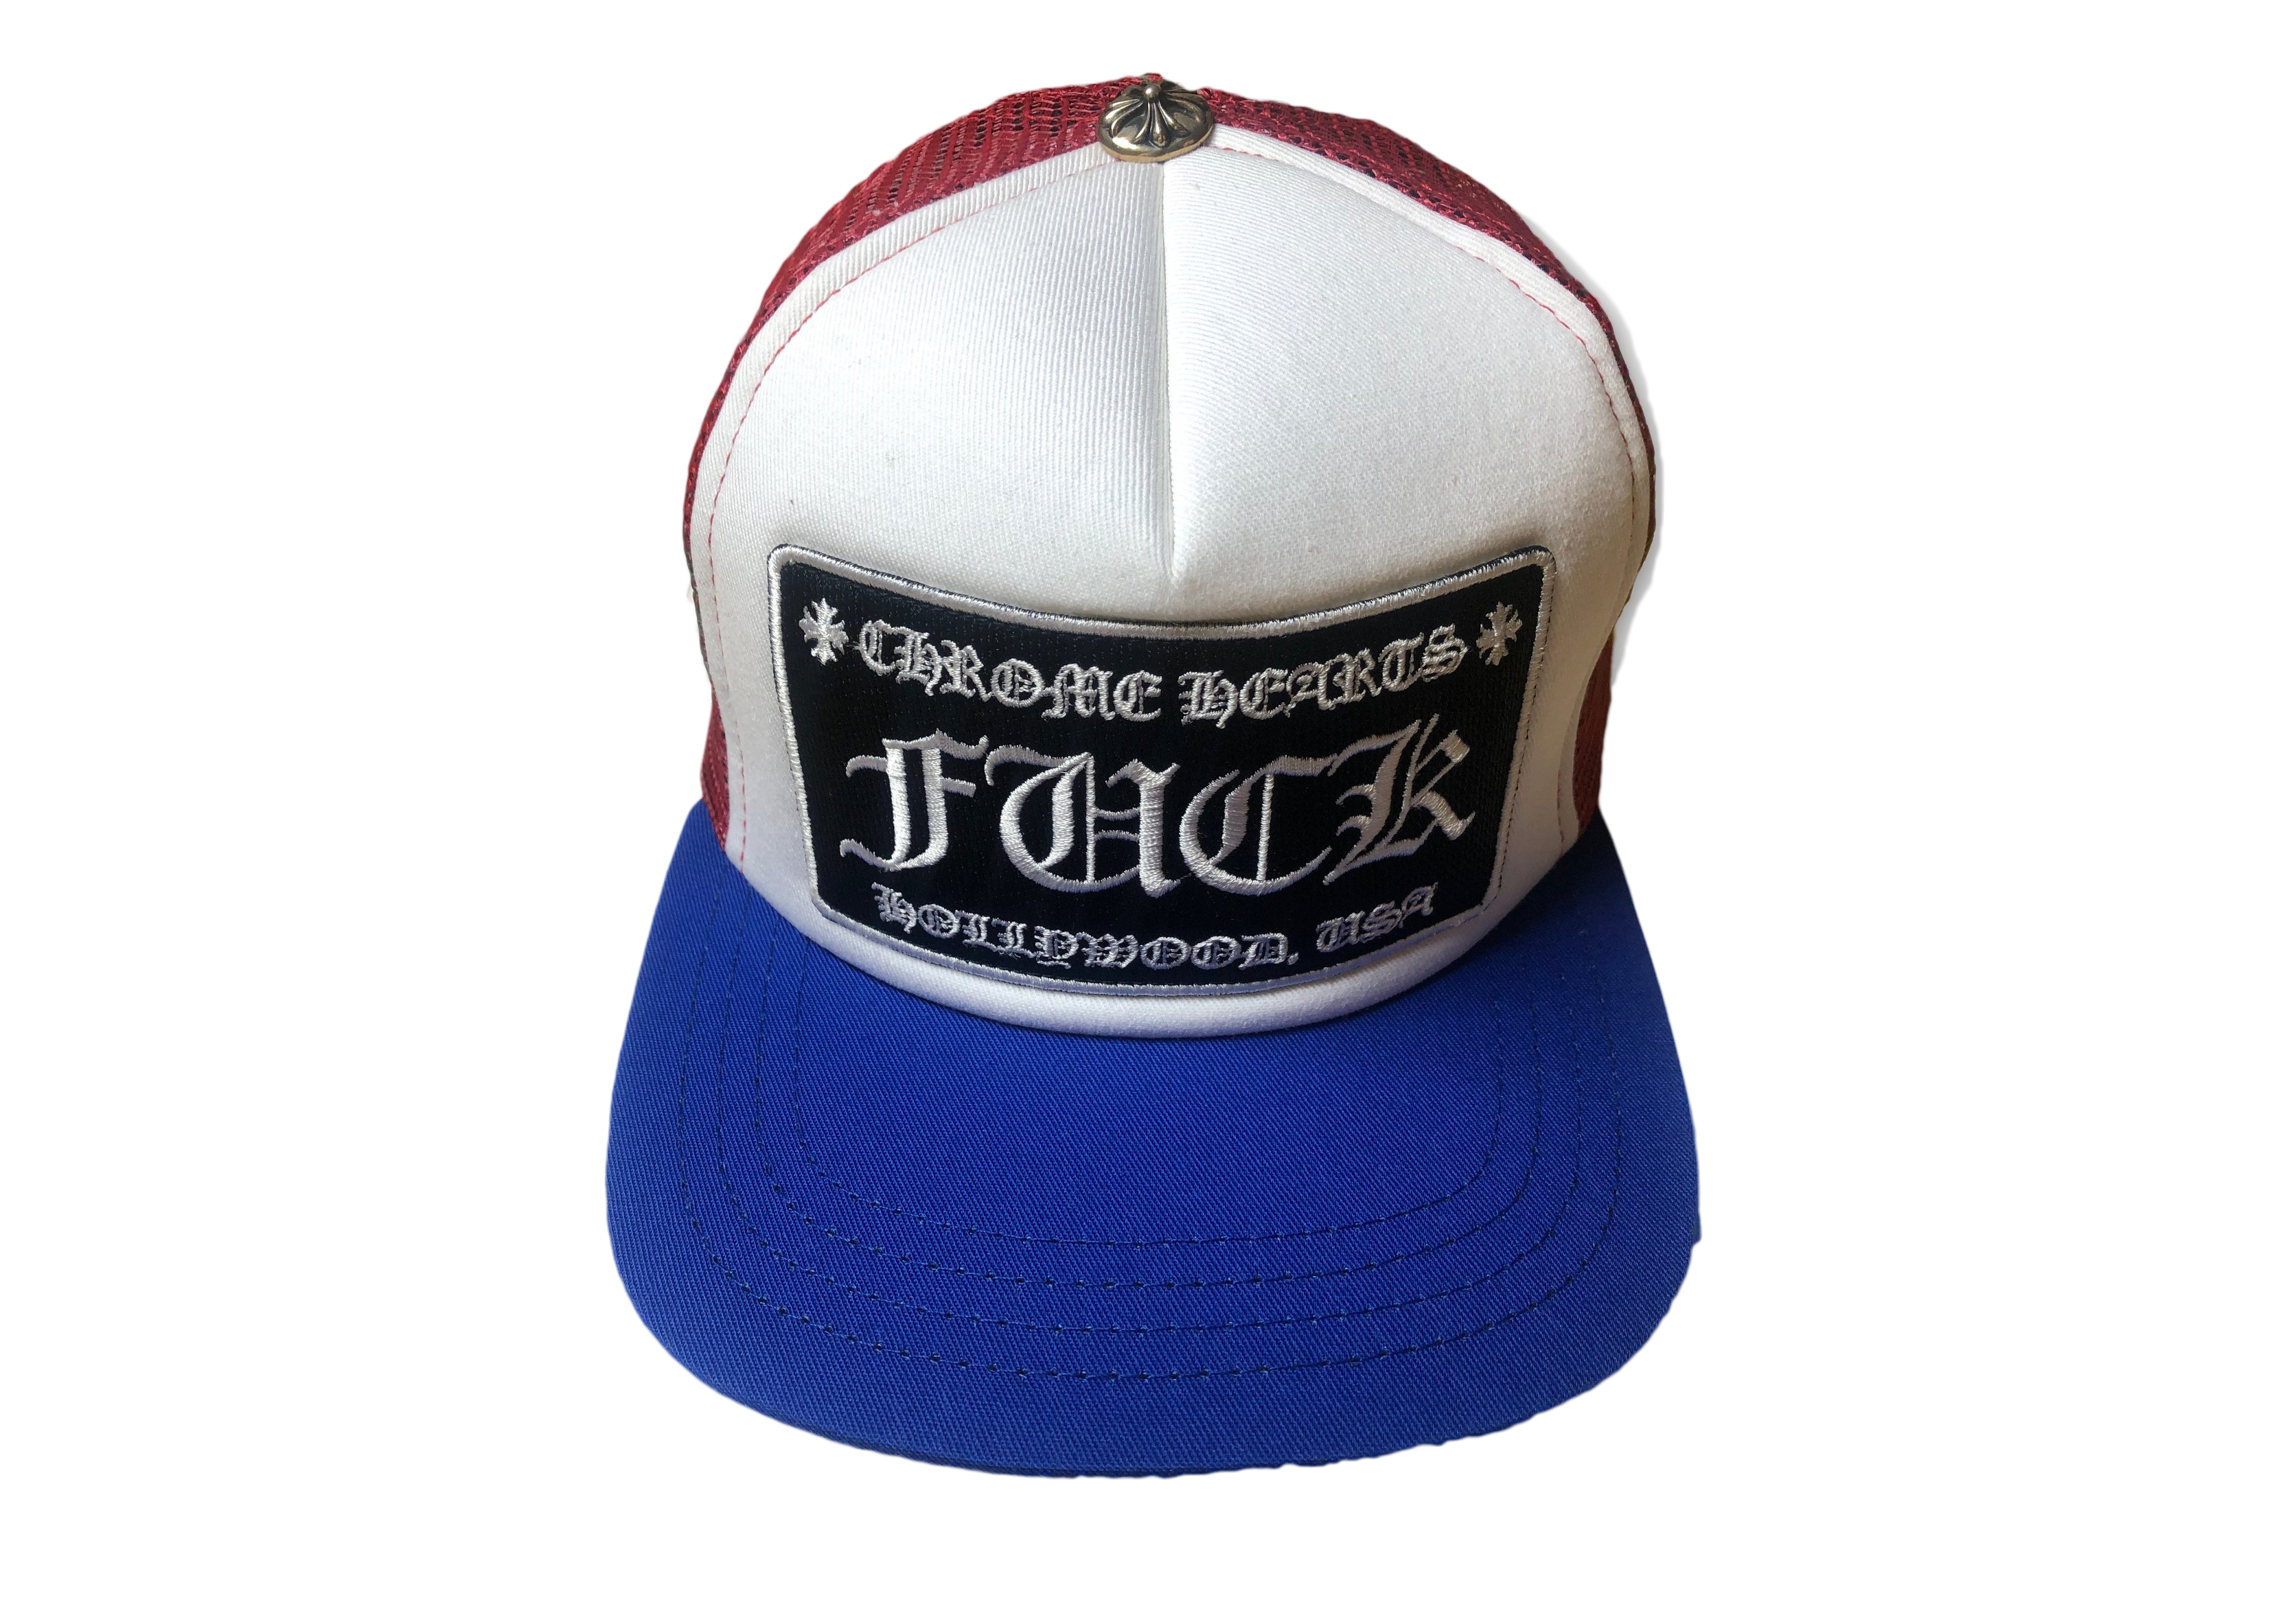 Chrome Hearts FUCK Hollywood Trucker Hat Red/White/Blue - US